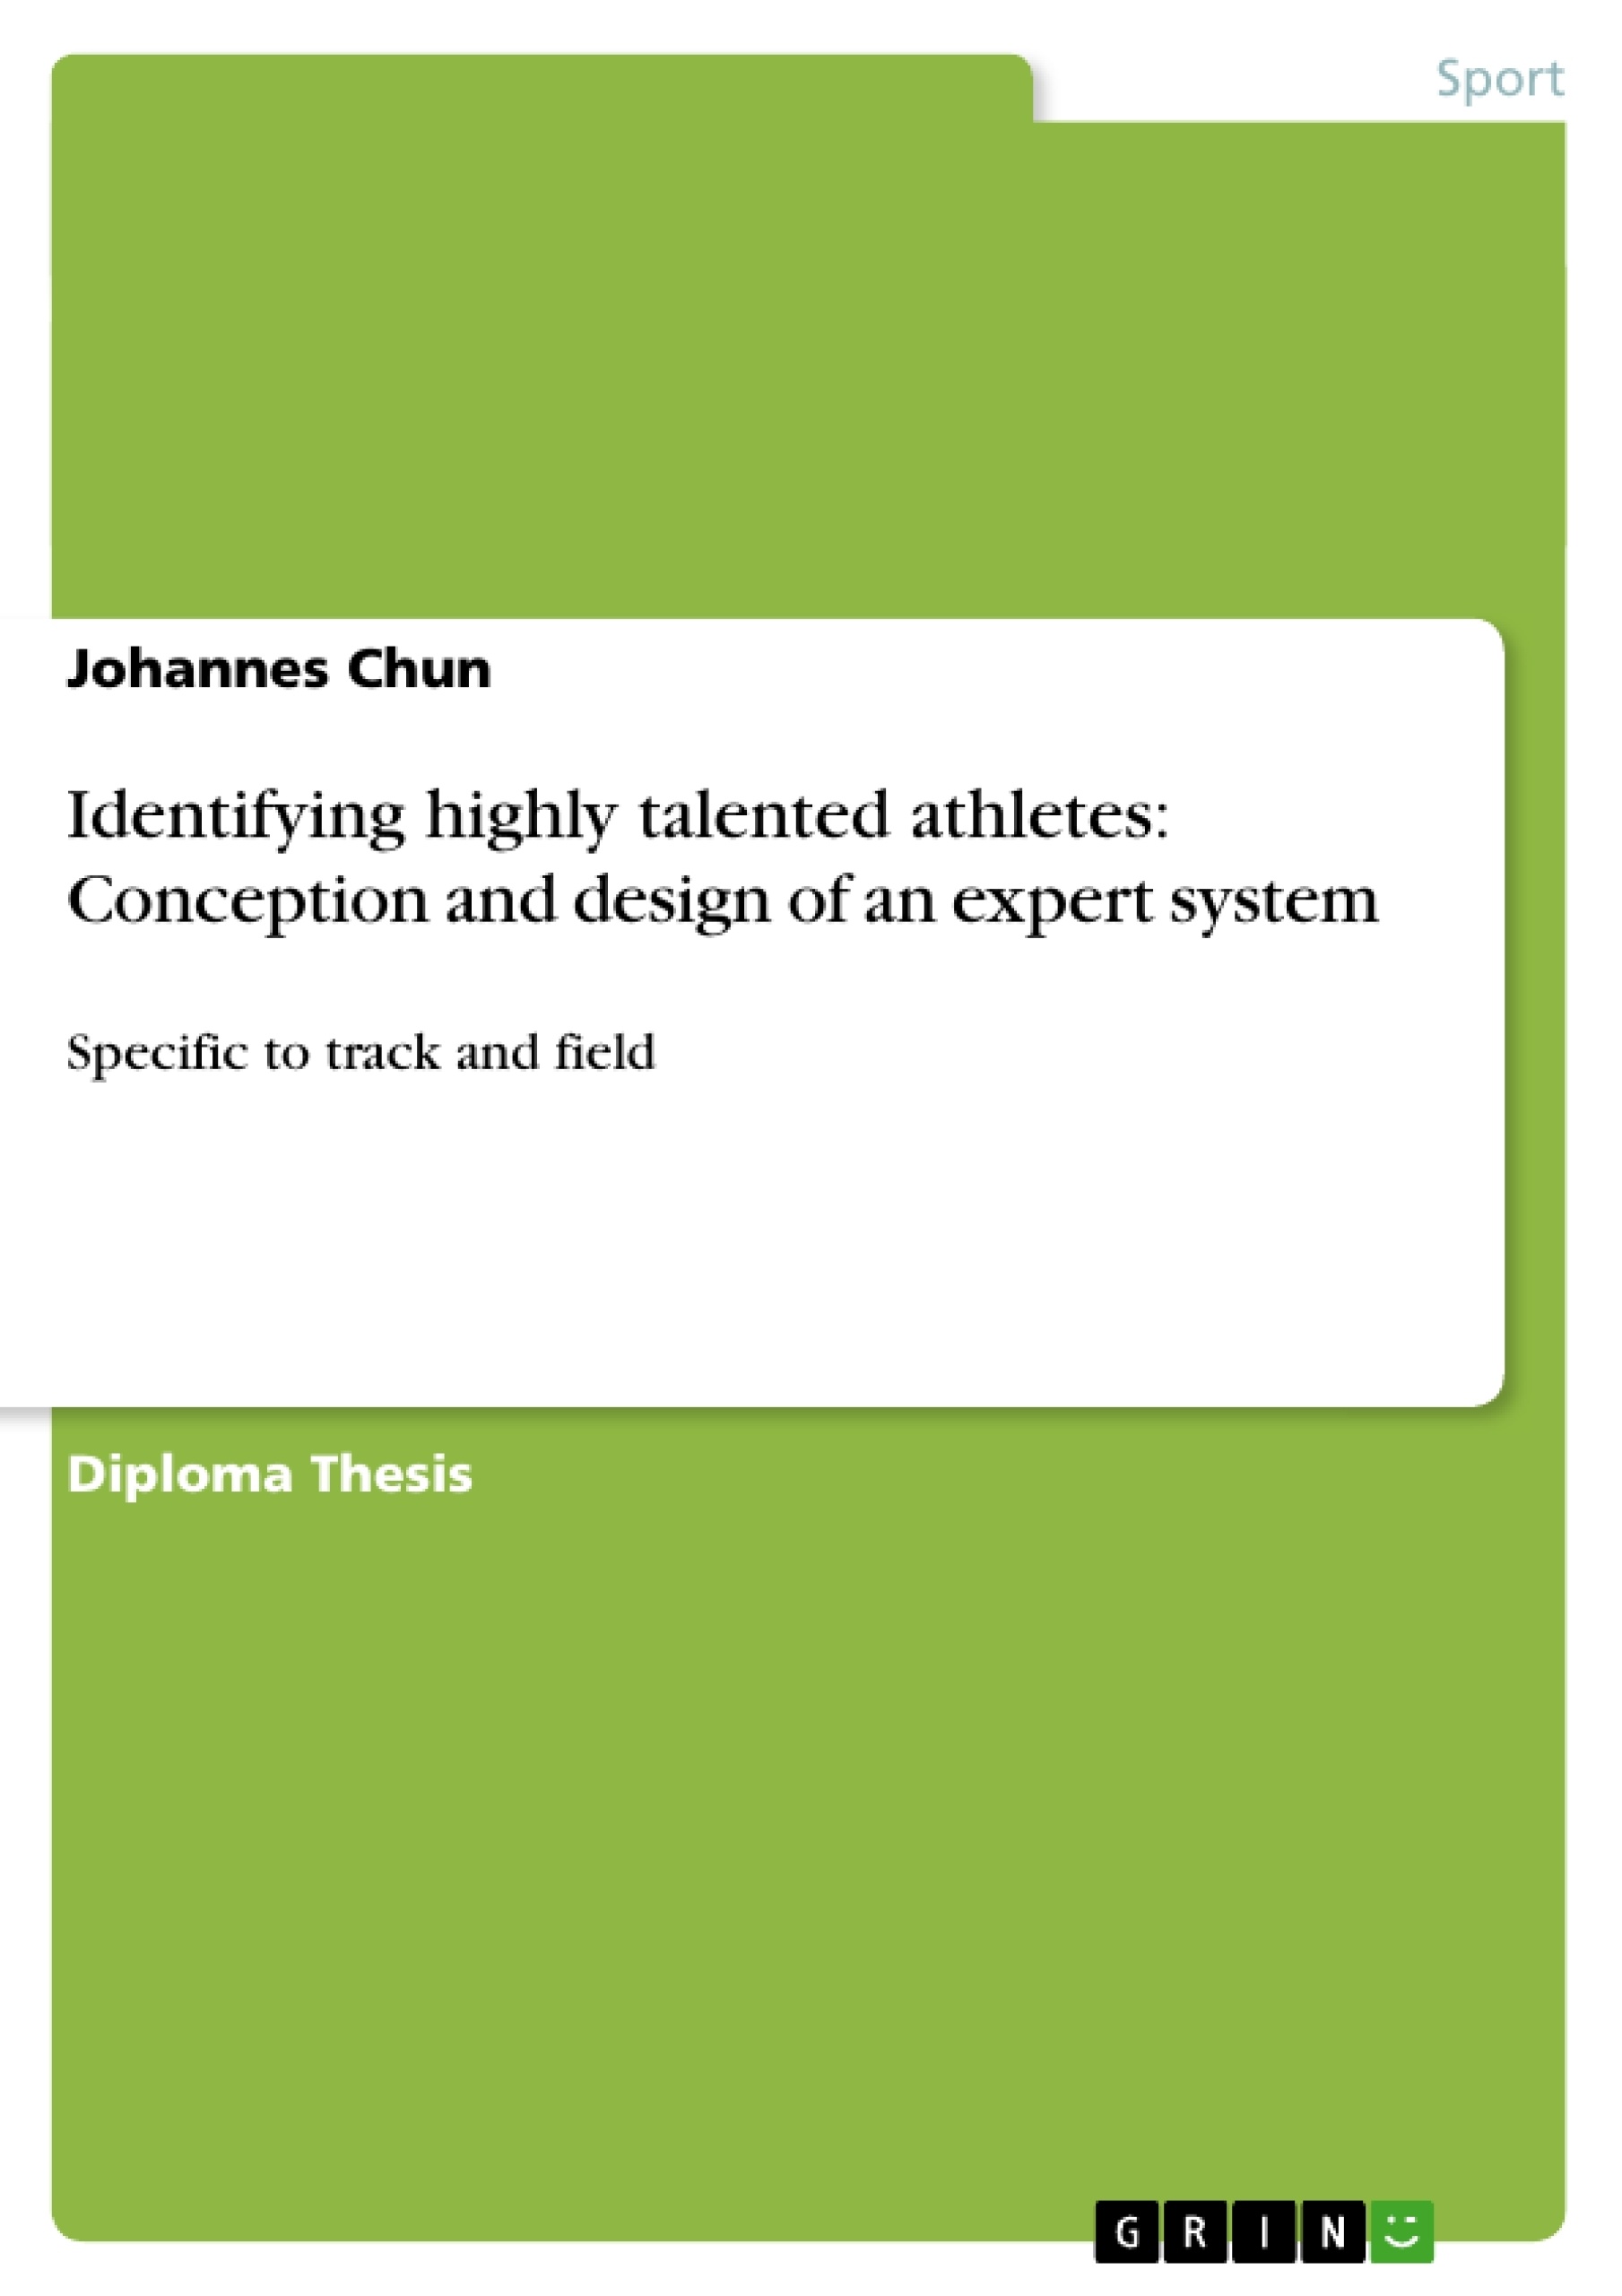 Title: Identifying highly talented athletes: Conception and design of an expert system